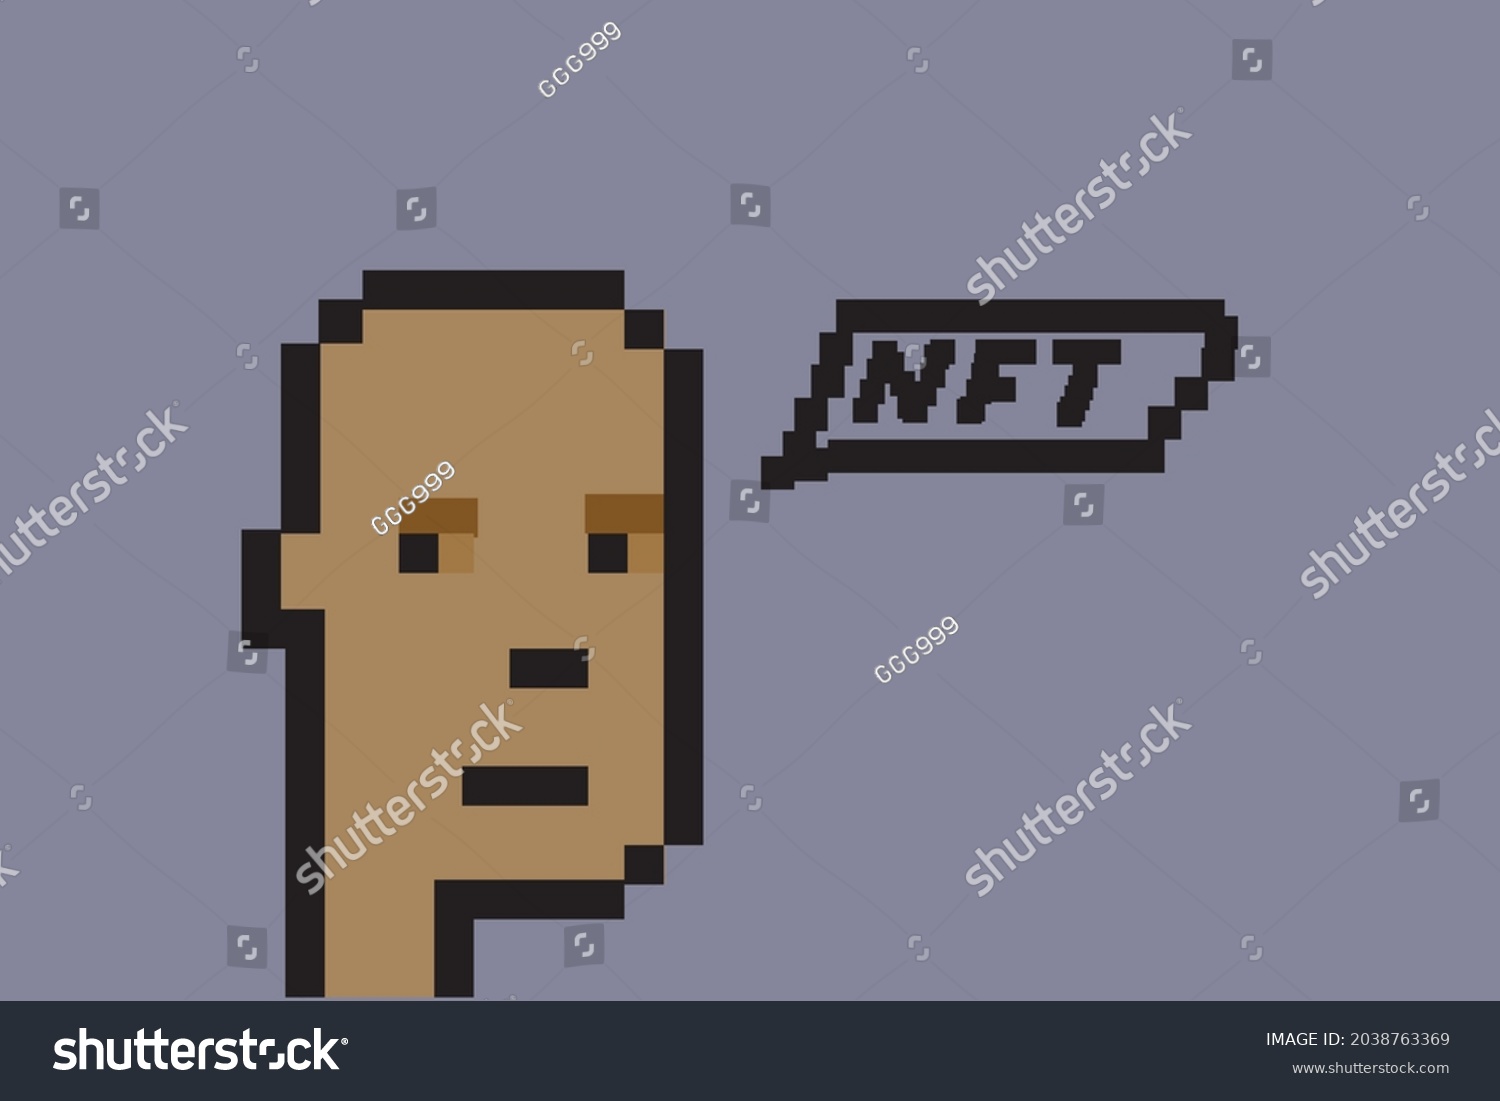 SVG of Cryptopunk NFT blockchain, non fungible. Pixel art character svg